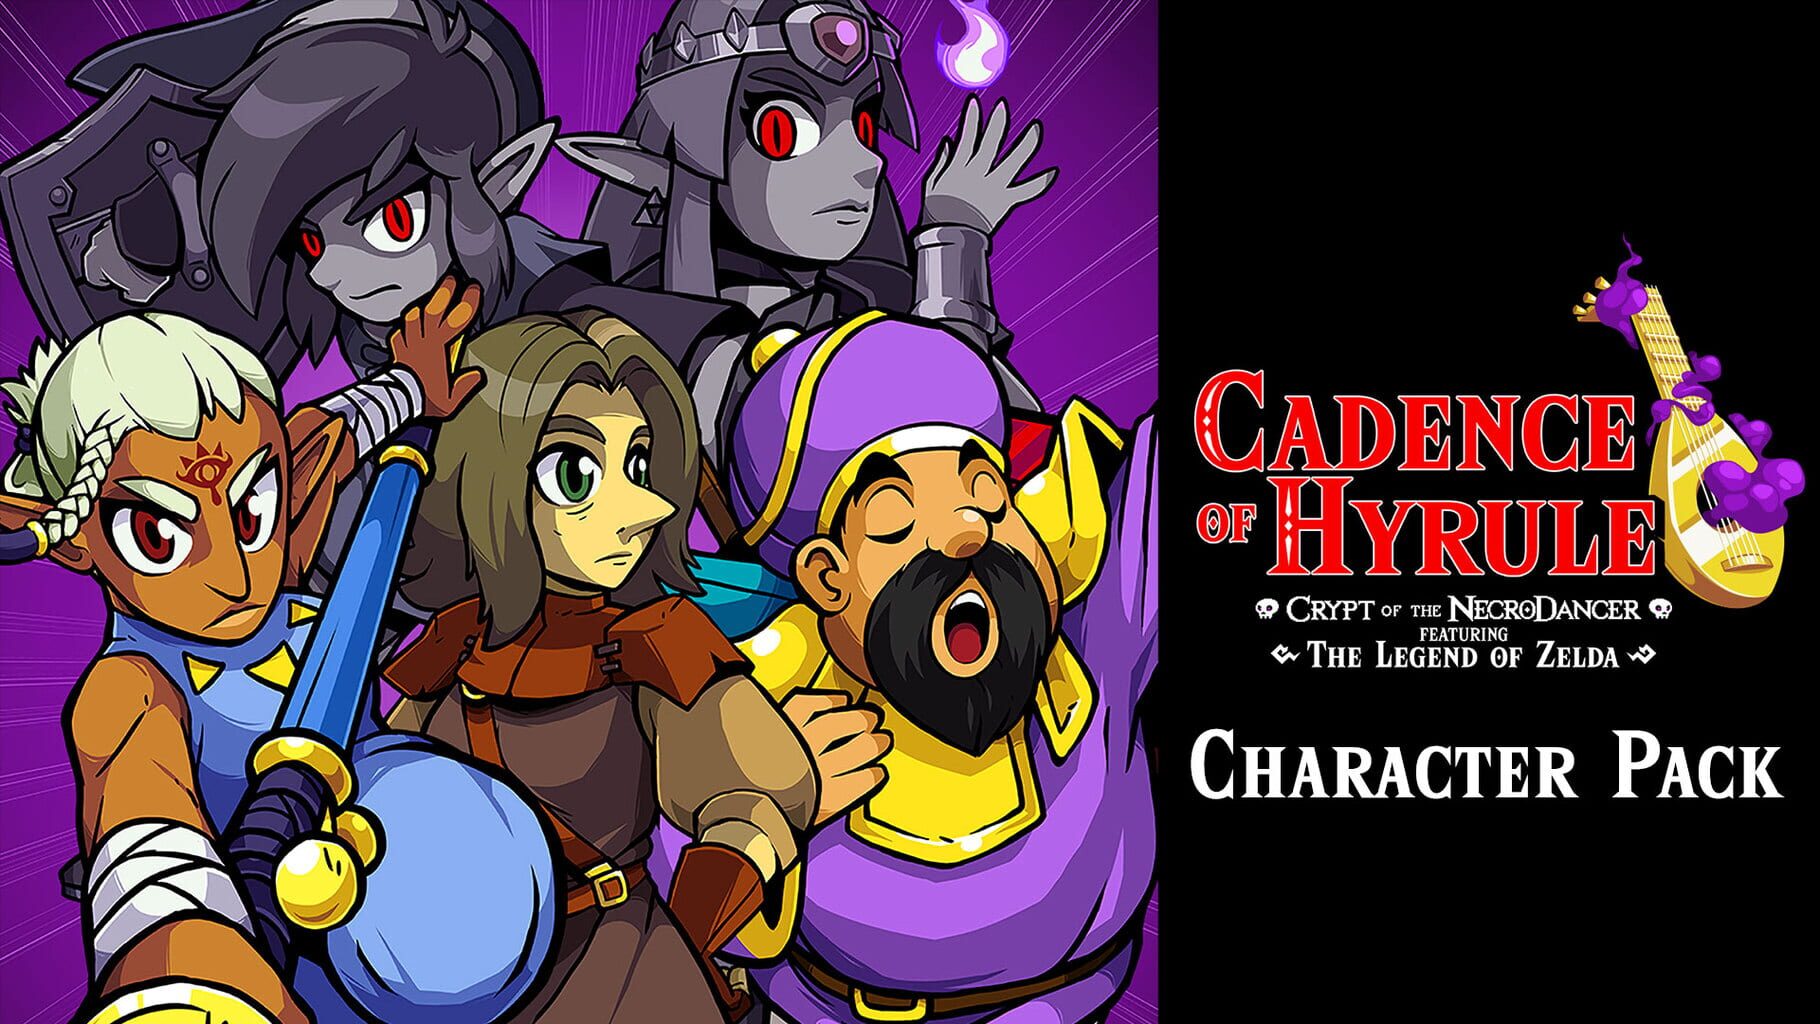 Arte - Cadence of Hyrule: Crypt of the NecroDancer Featuring the Legend of Zelda - Character Pack